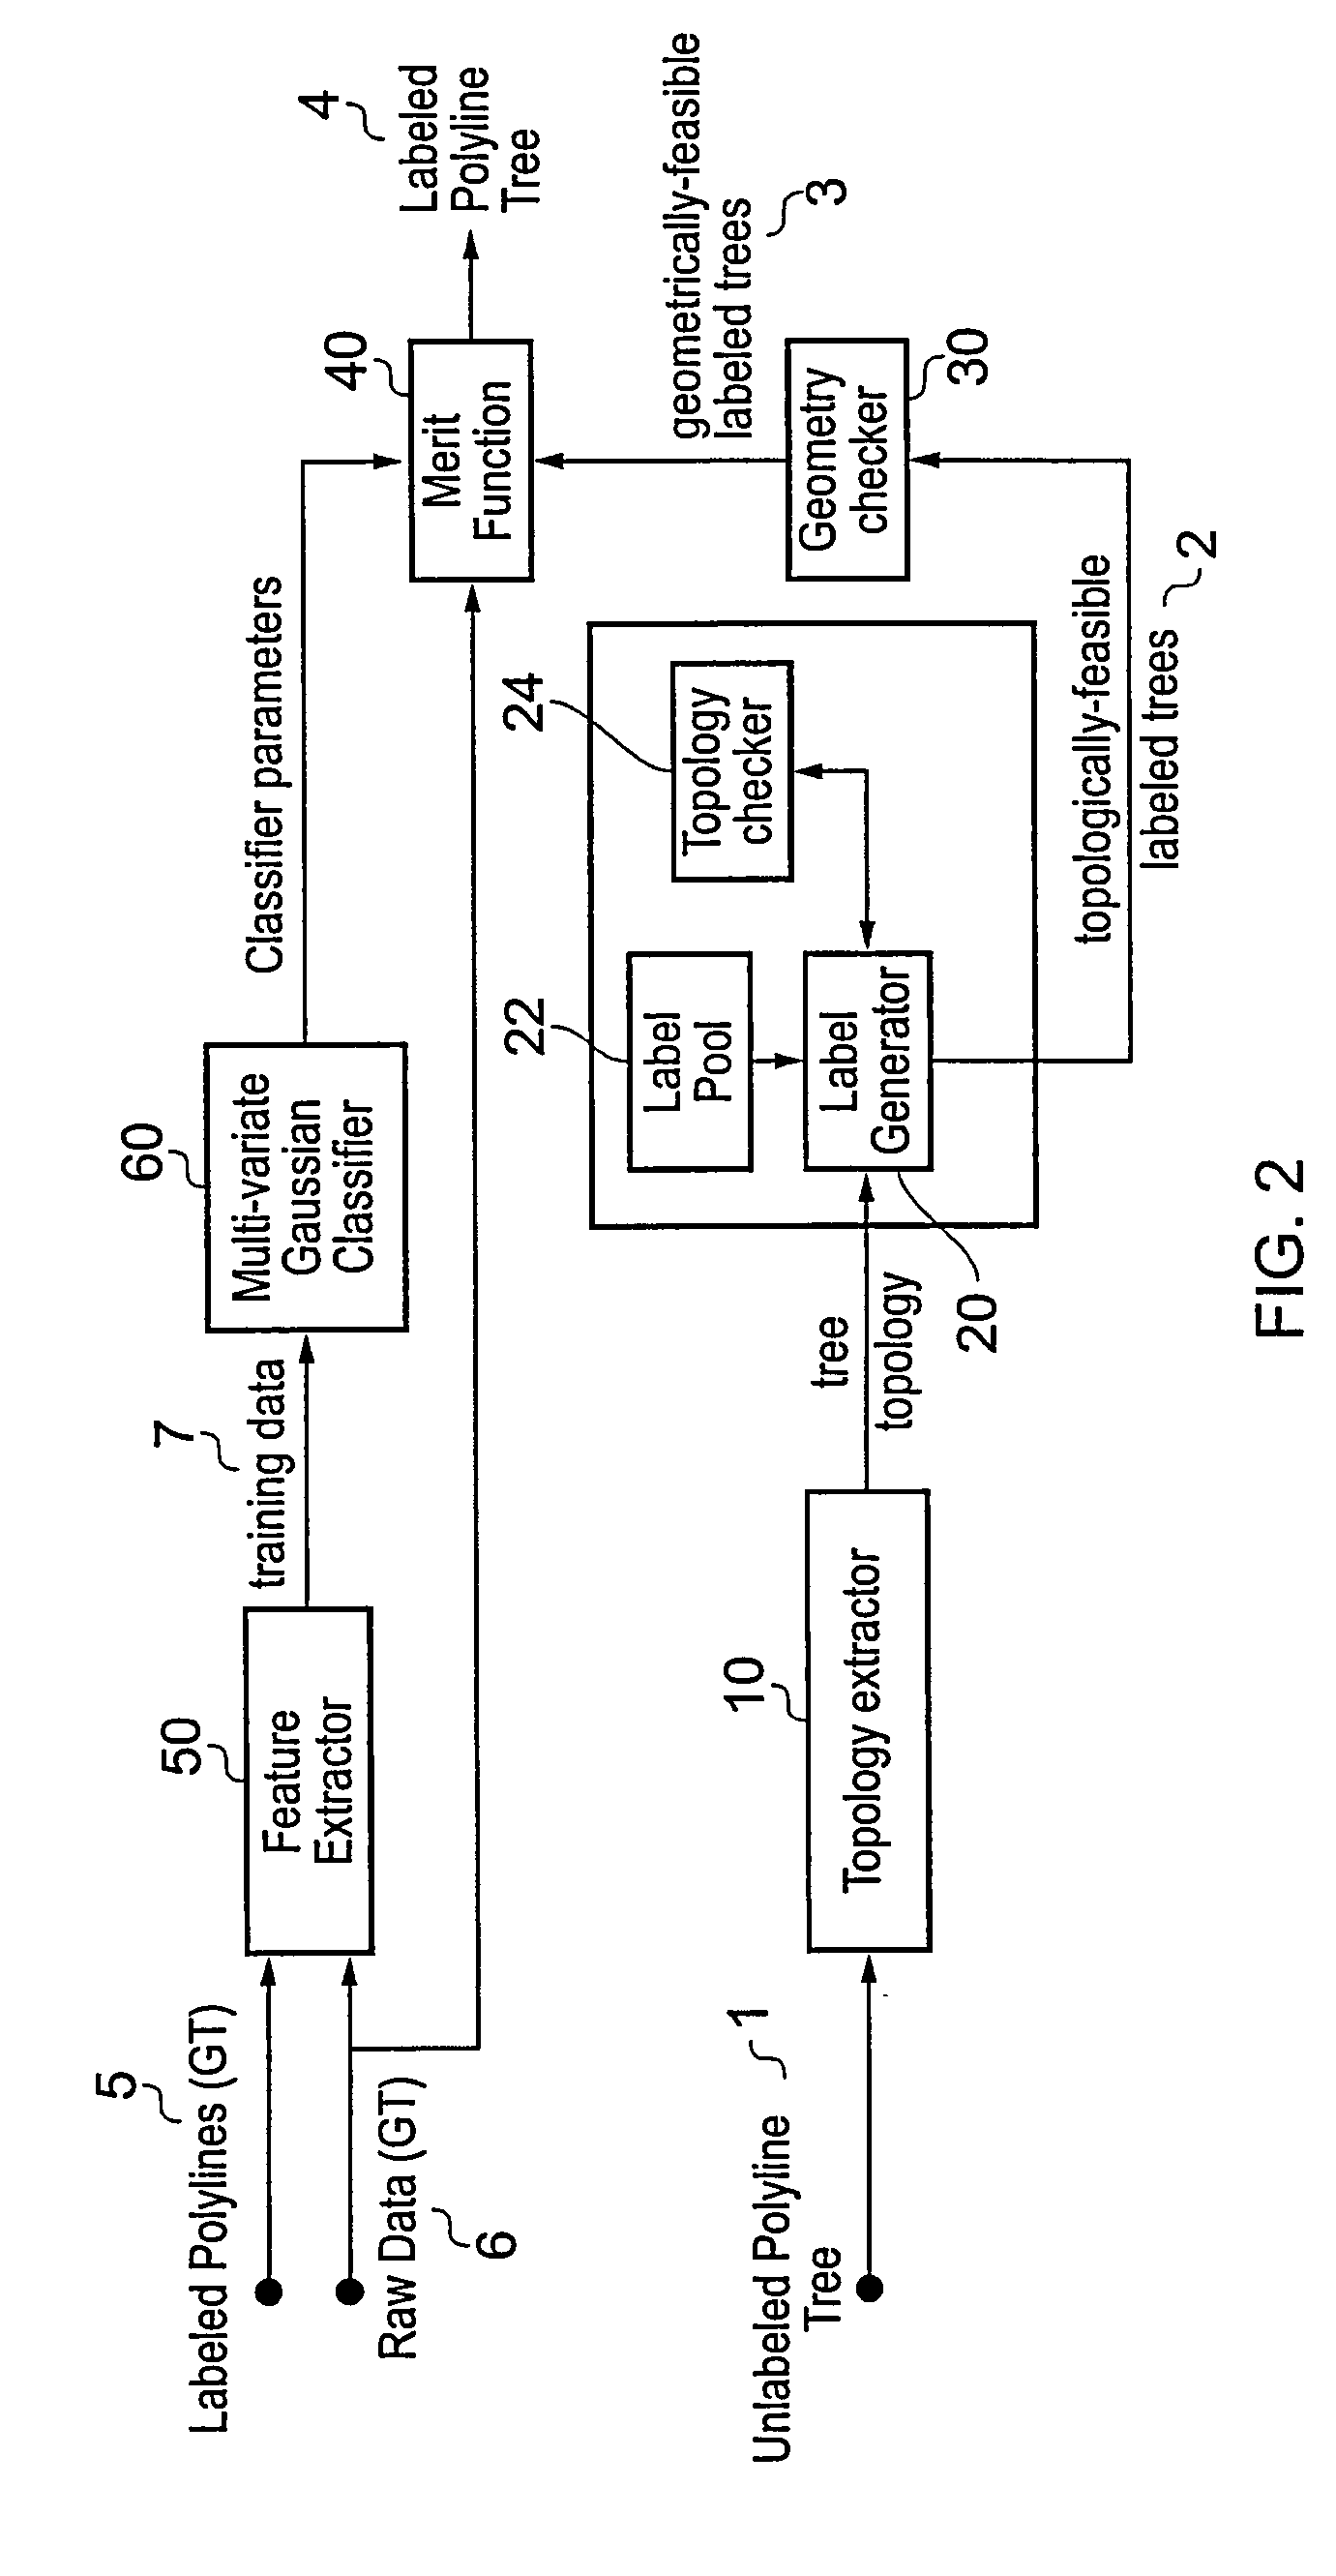 Method and apparatus for classification of coronary artery image data